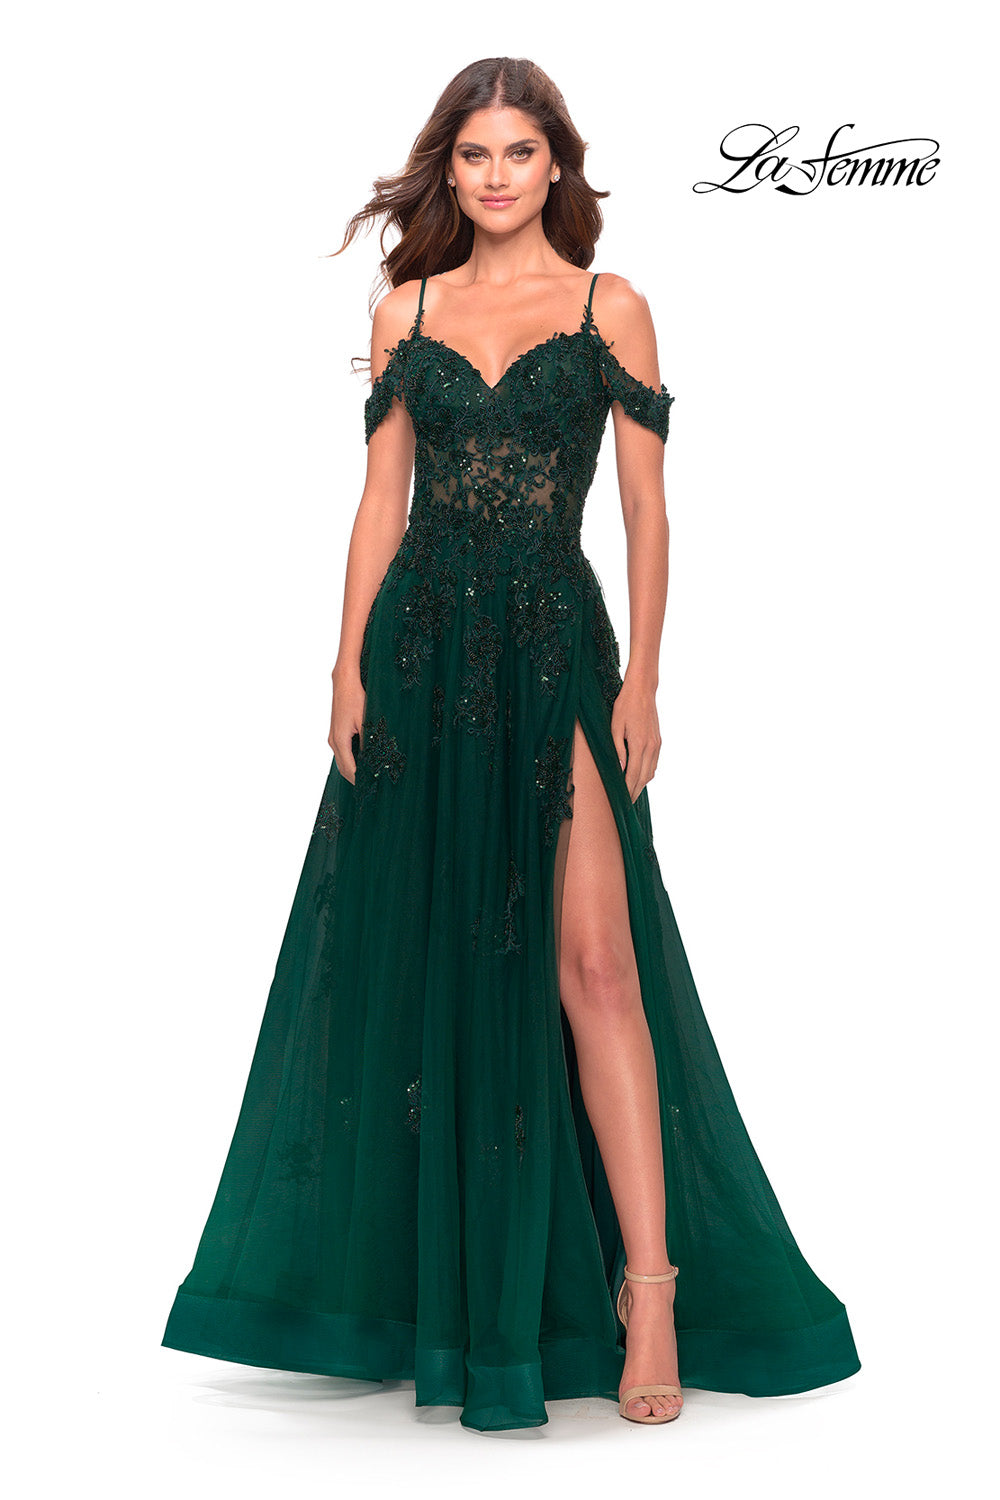 La Femme 31346 prom dress images.  La Femme 31346 is available in these colors: Black, Dark Emerald.